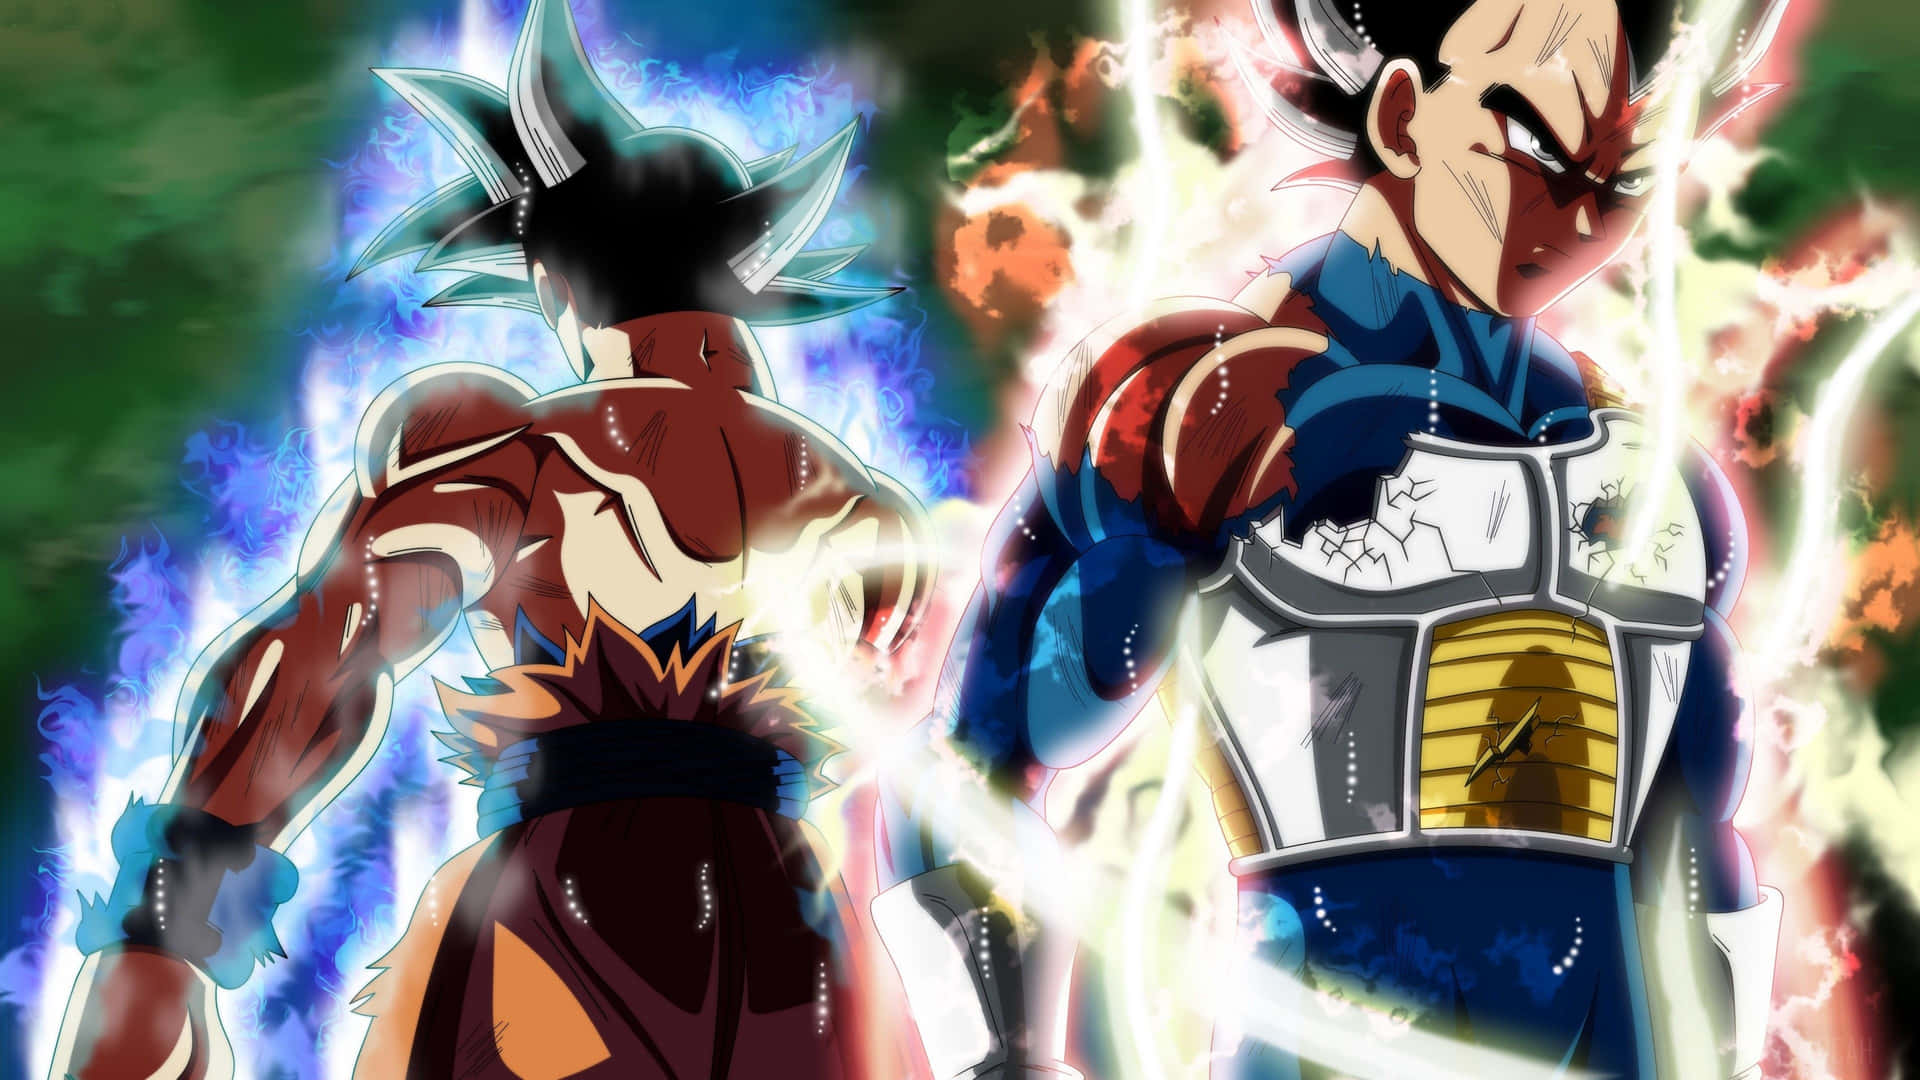 Free Goku And Vegeta Pictures , [100+] Goku And Vegeta Pictures for FREE |  